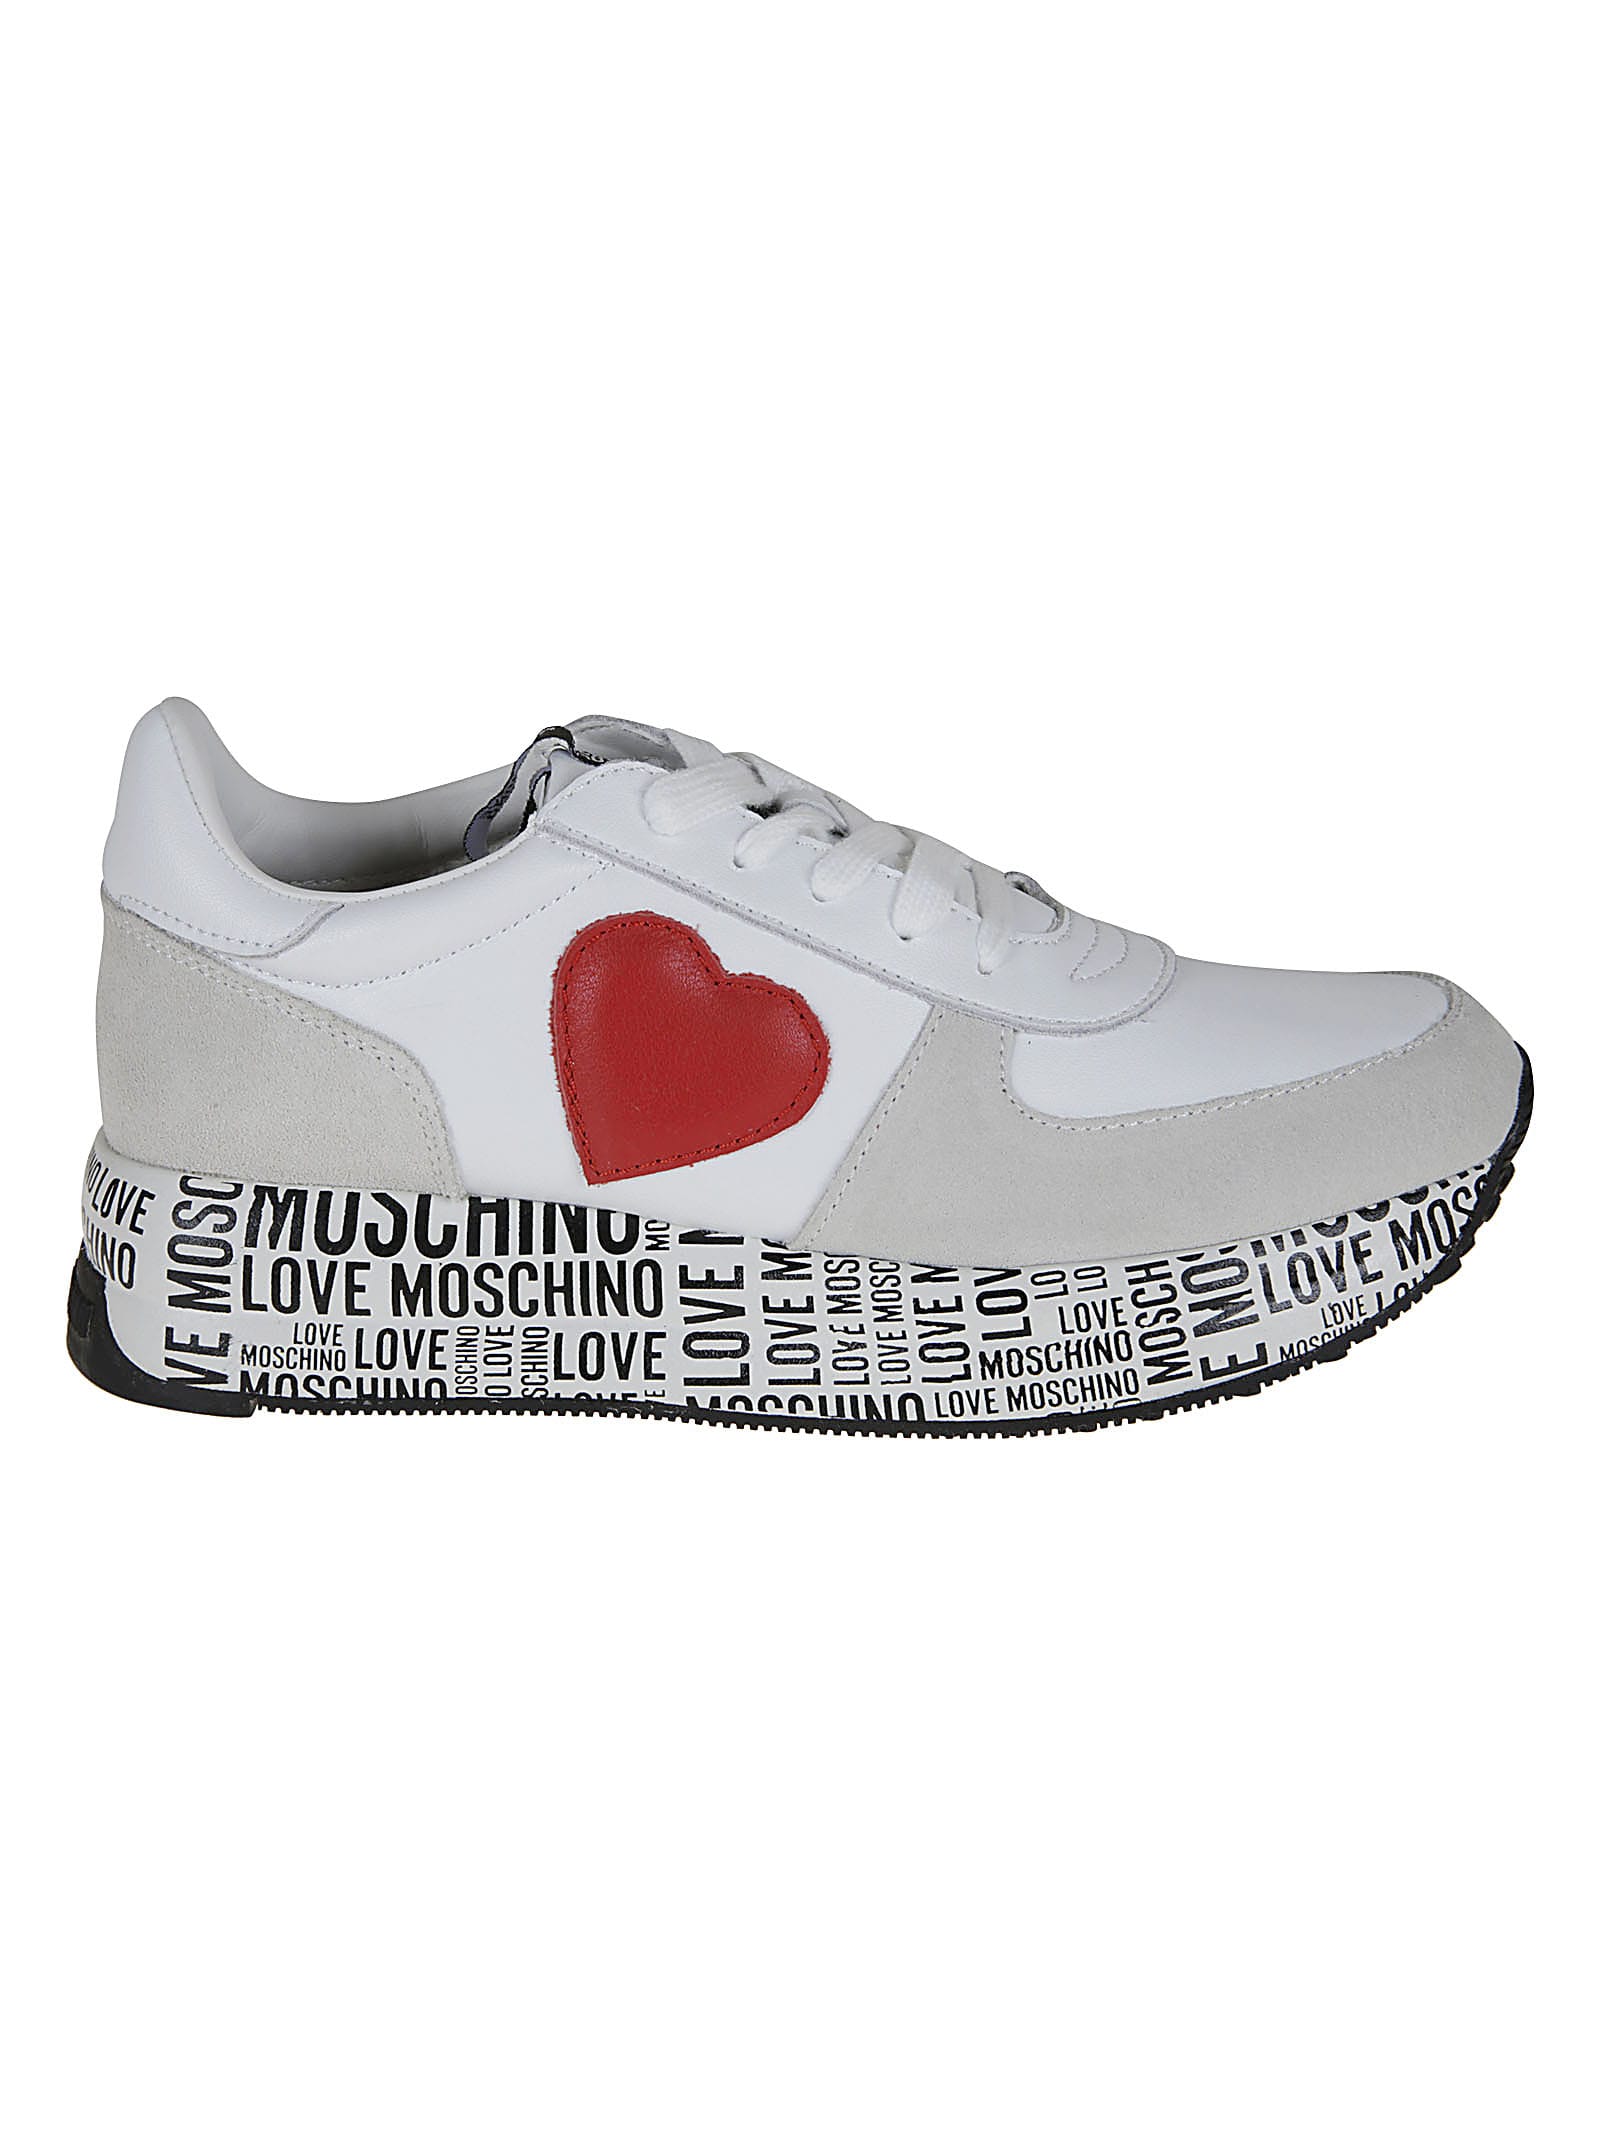 Love Moschino Heart Patched Logo Printed Sole Sneakers